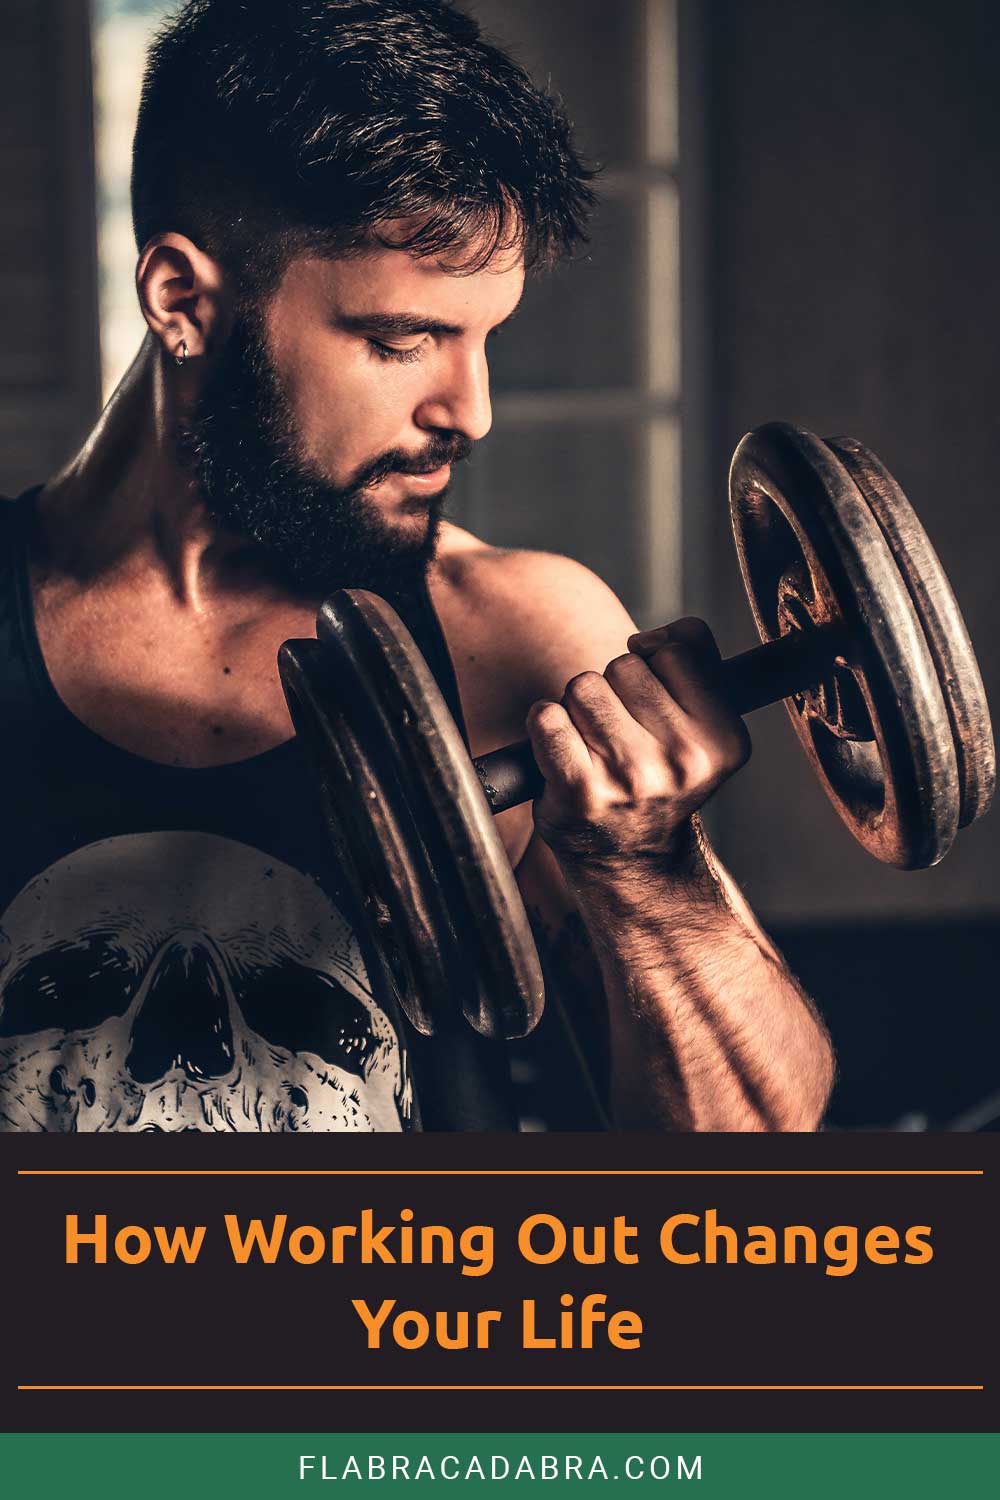 Man with beard on his face and a dumbbell in his hand - Working Out Changes Your Life.